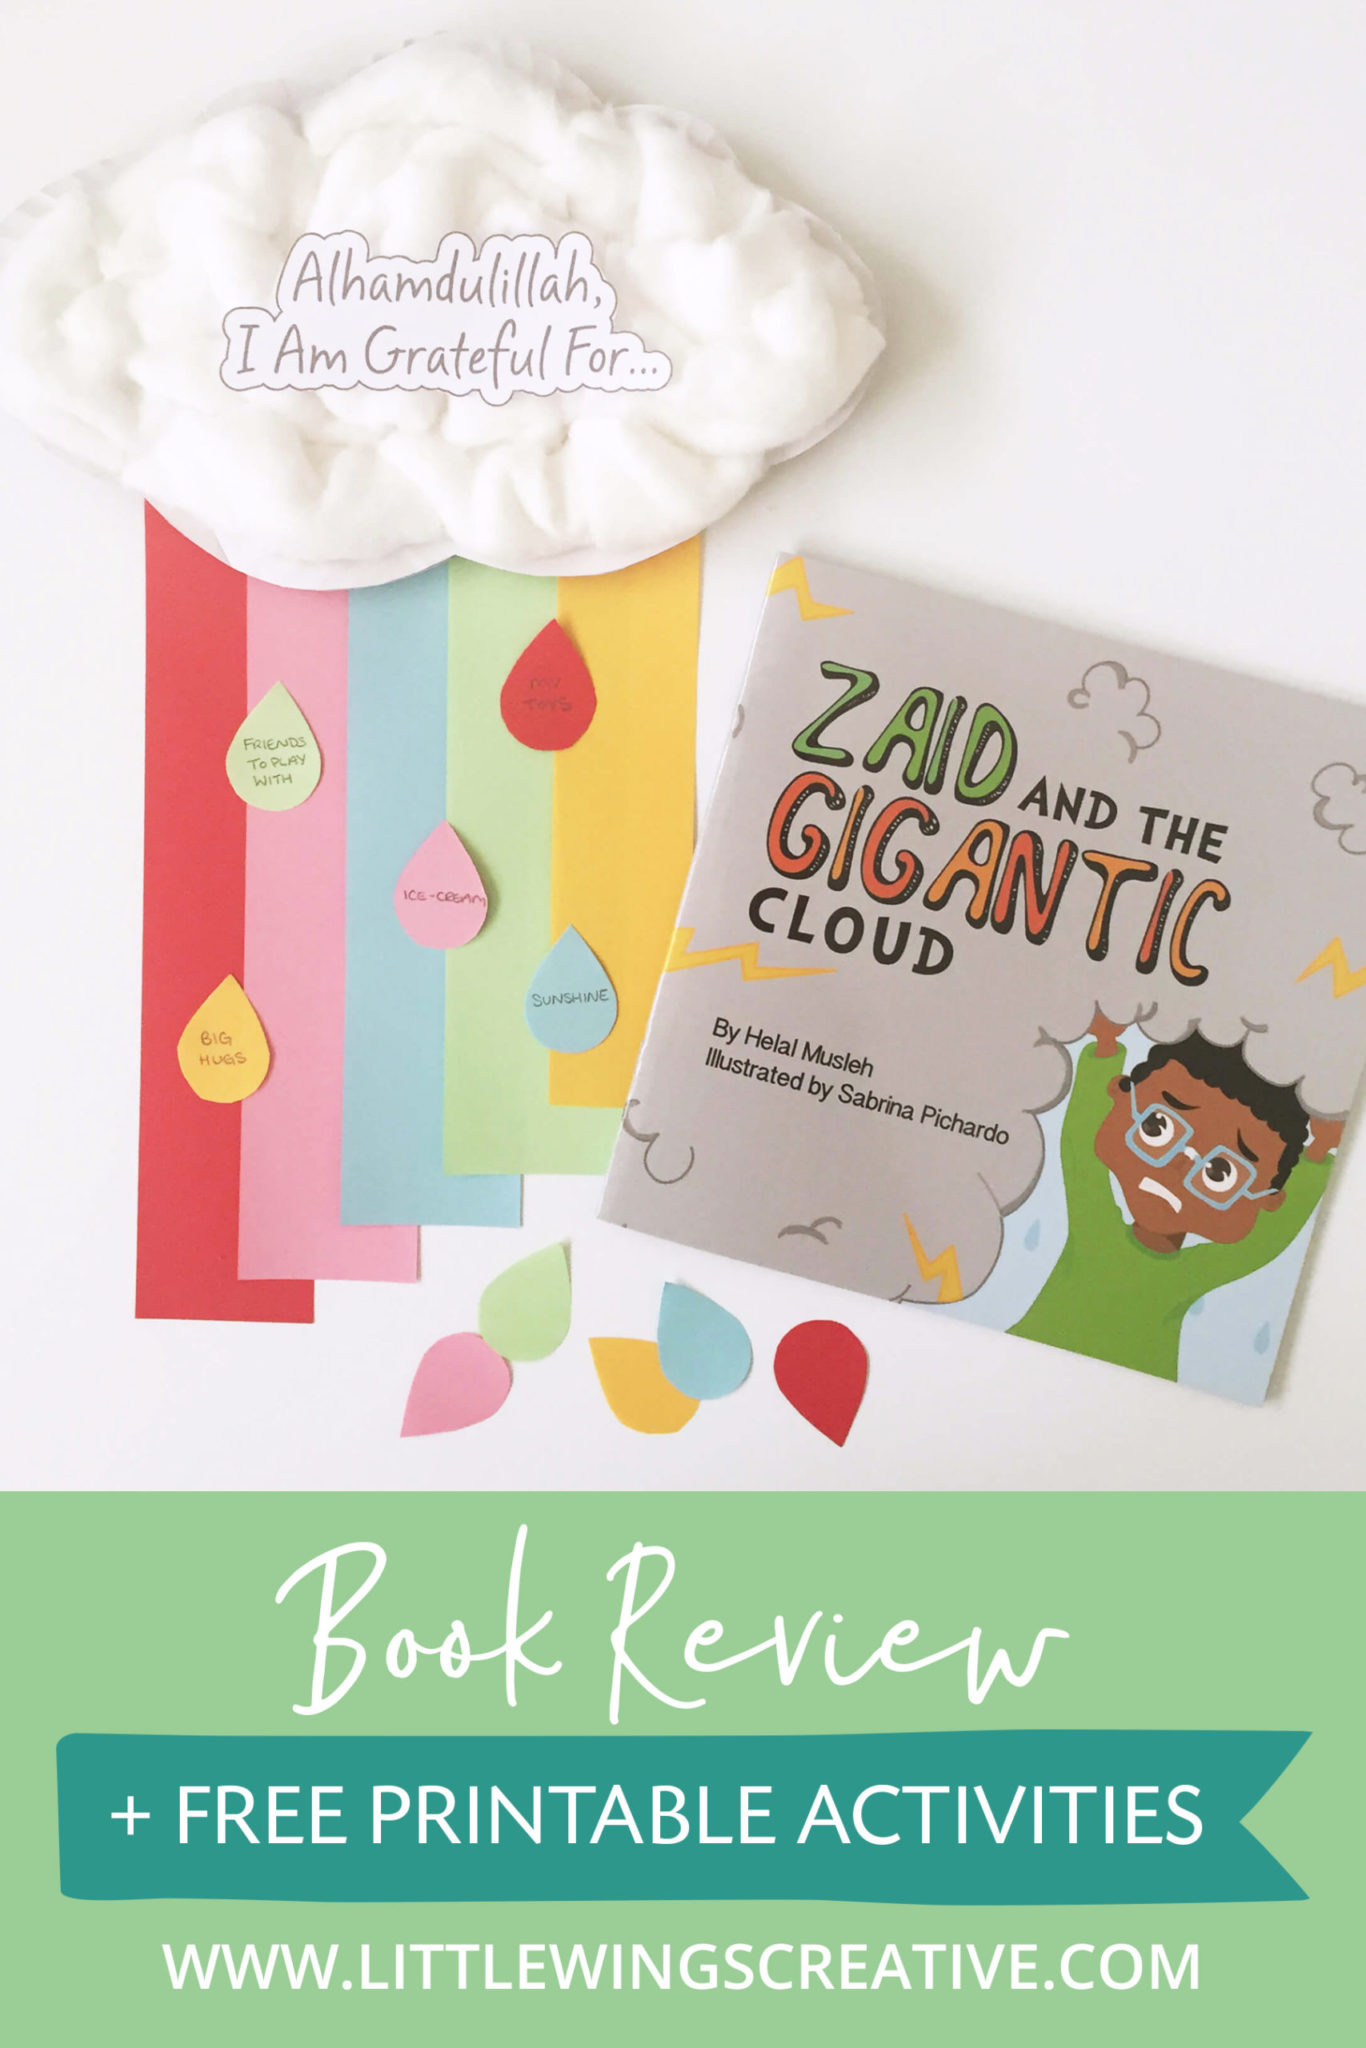 Zaid and the Gigantic Cloud Book Review with Free Printable Activity